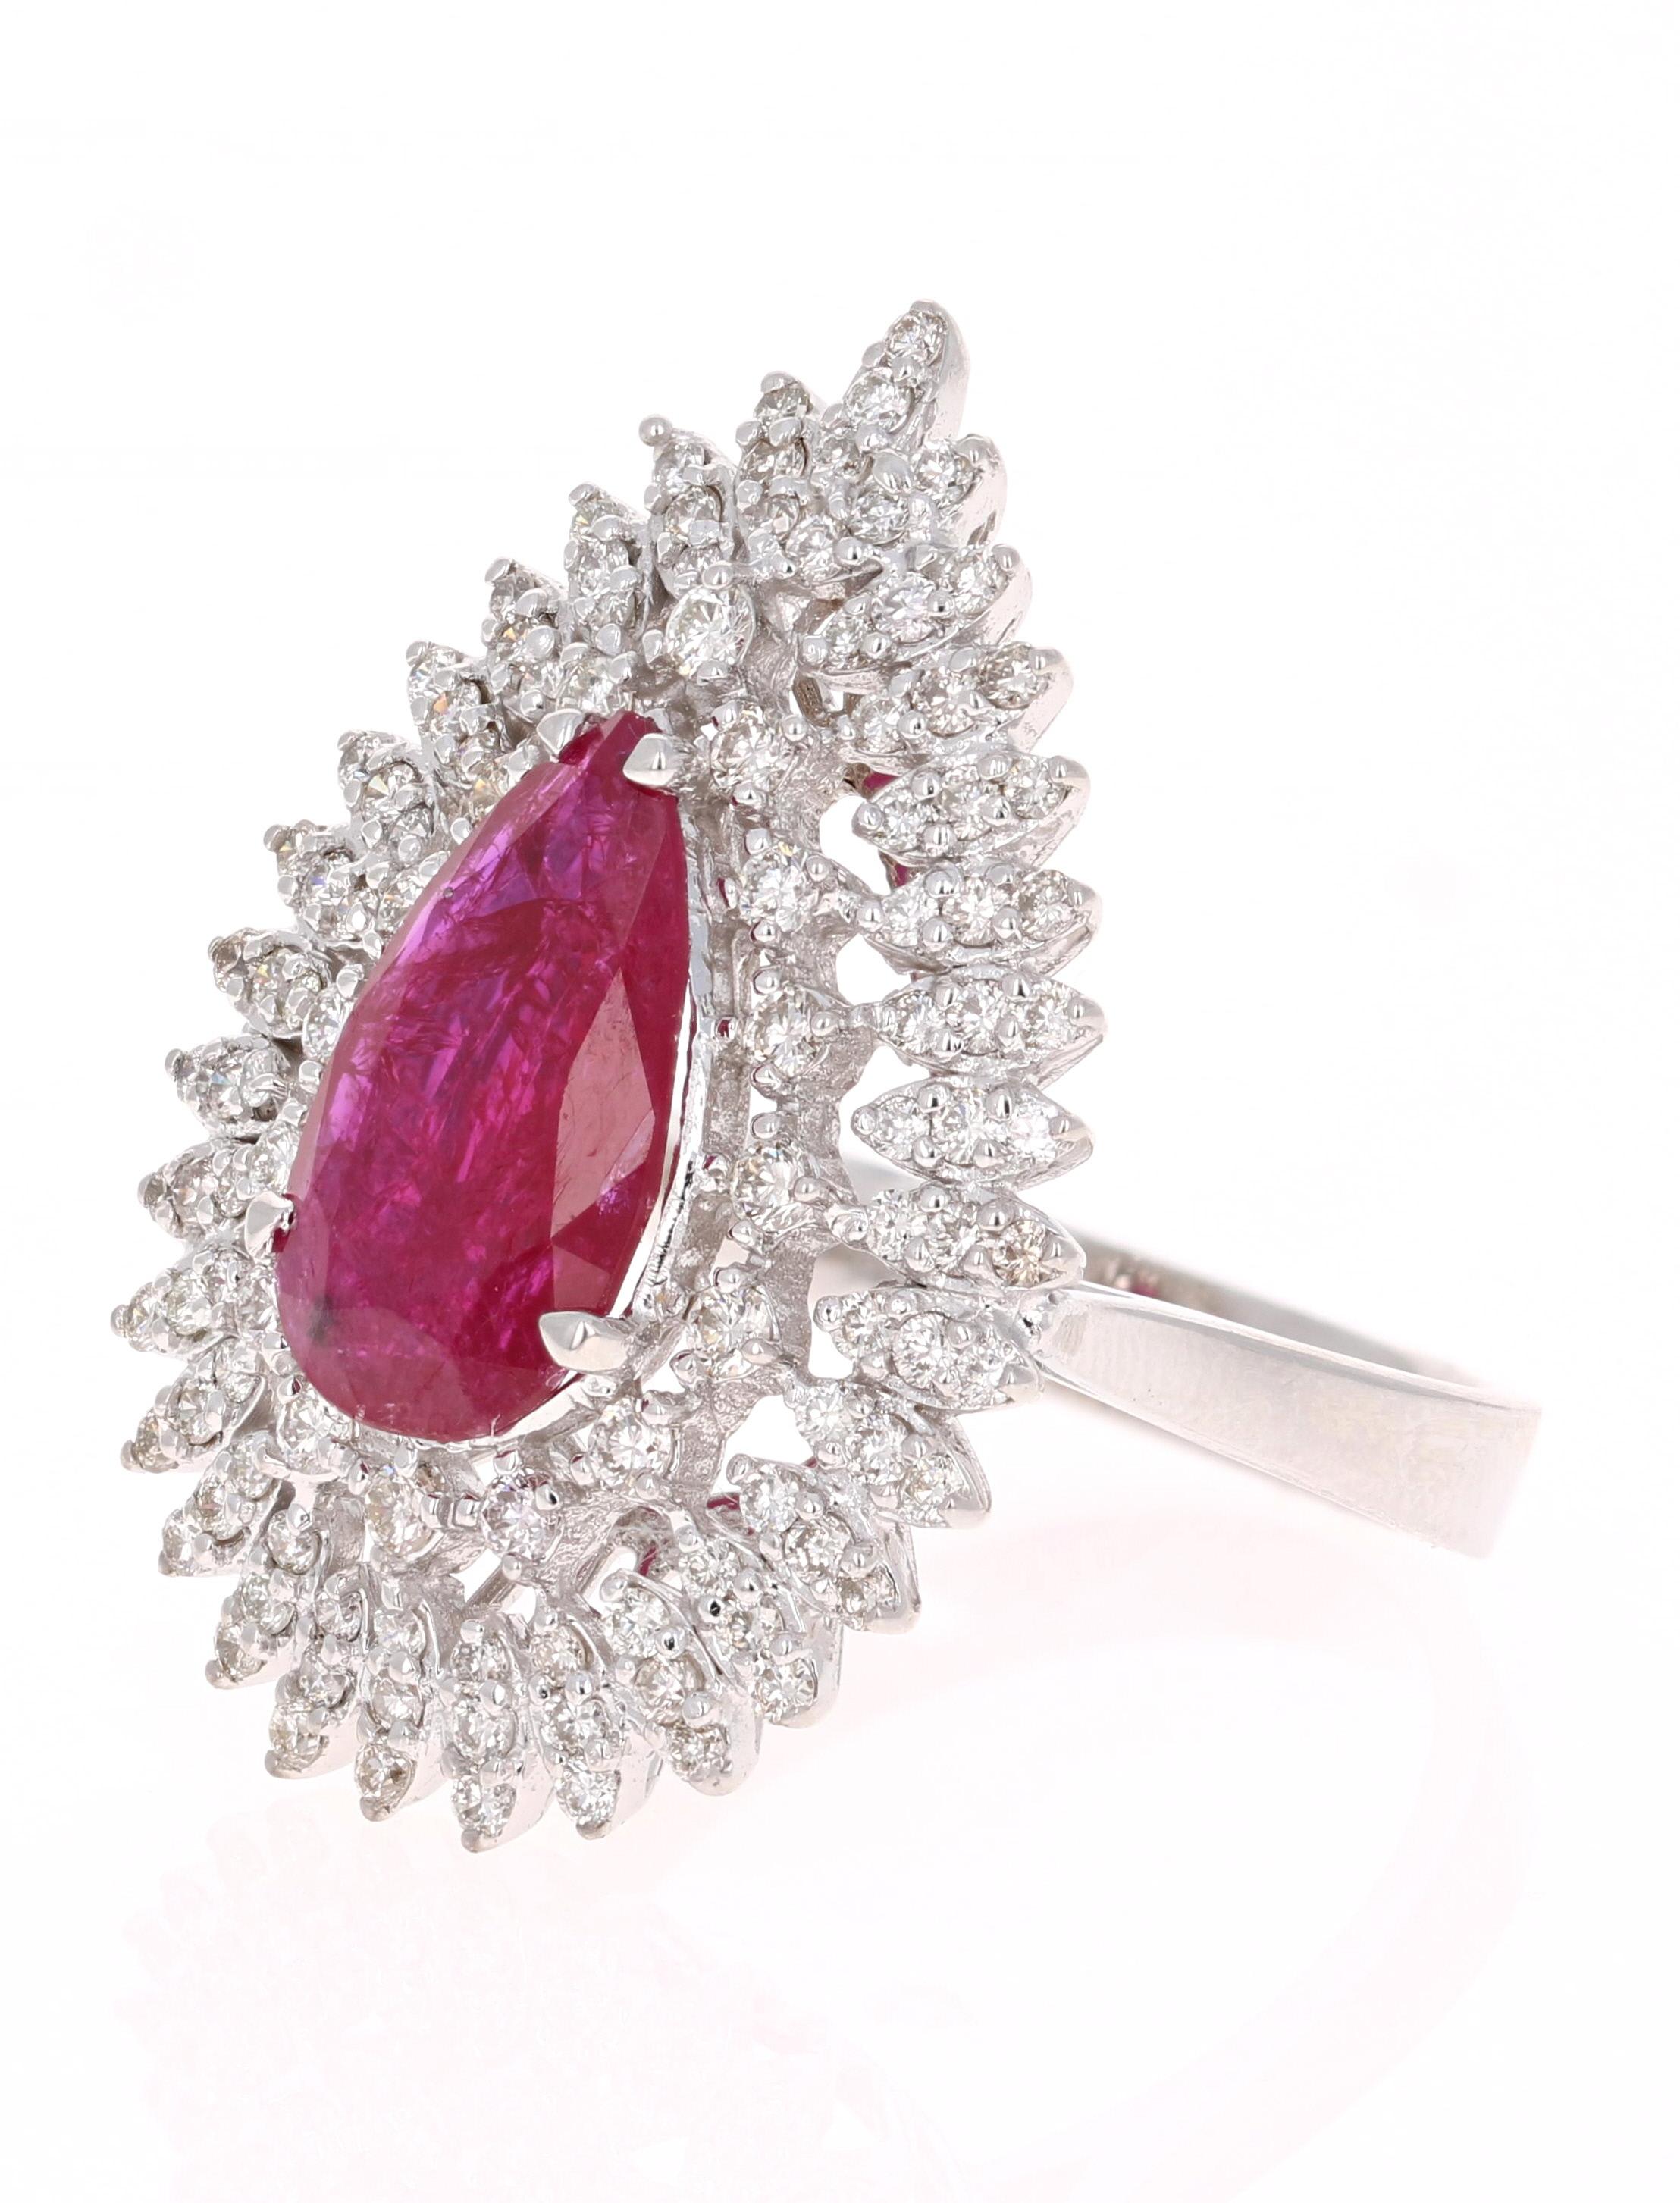 GIA Certified 4.89 Carat Unheated Ruby Diamond Cocktail Ring (Moderne)